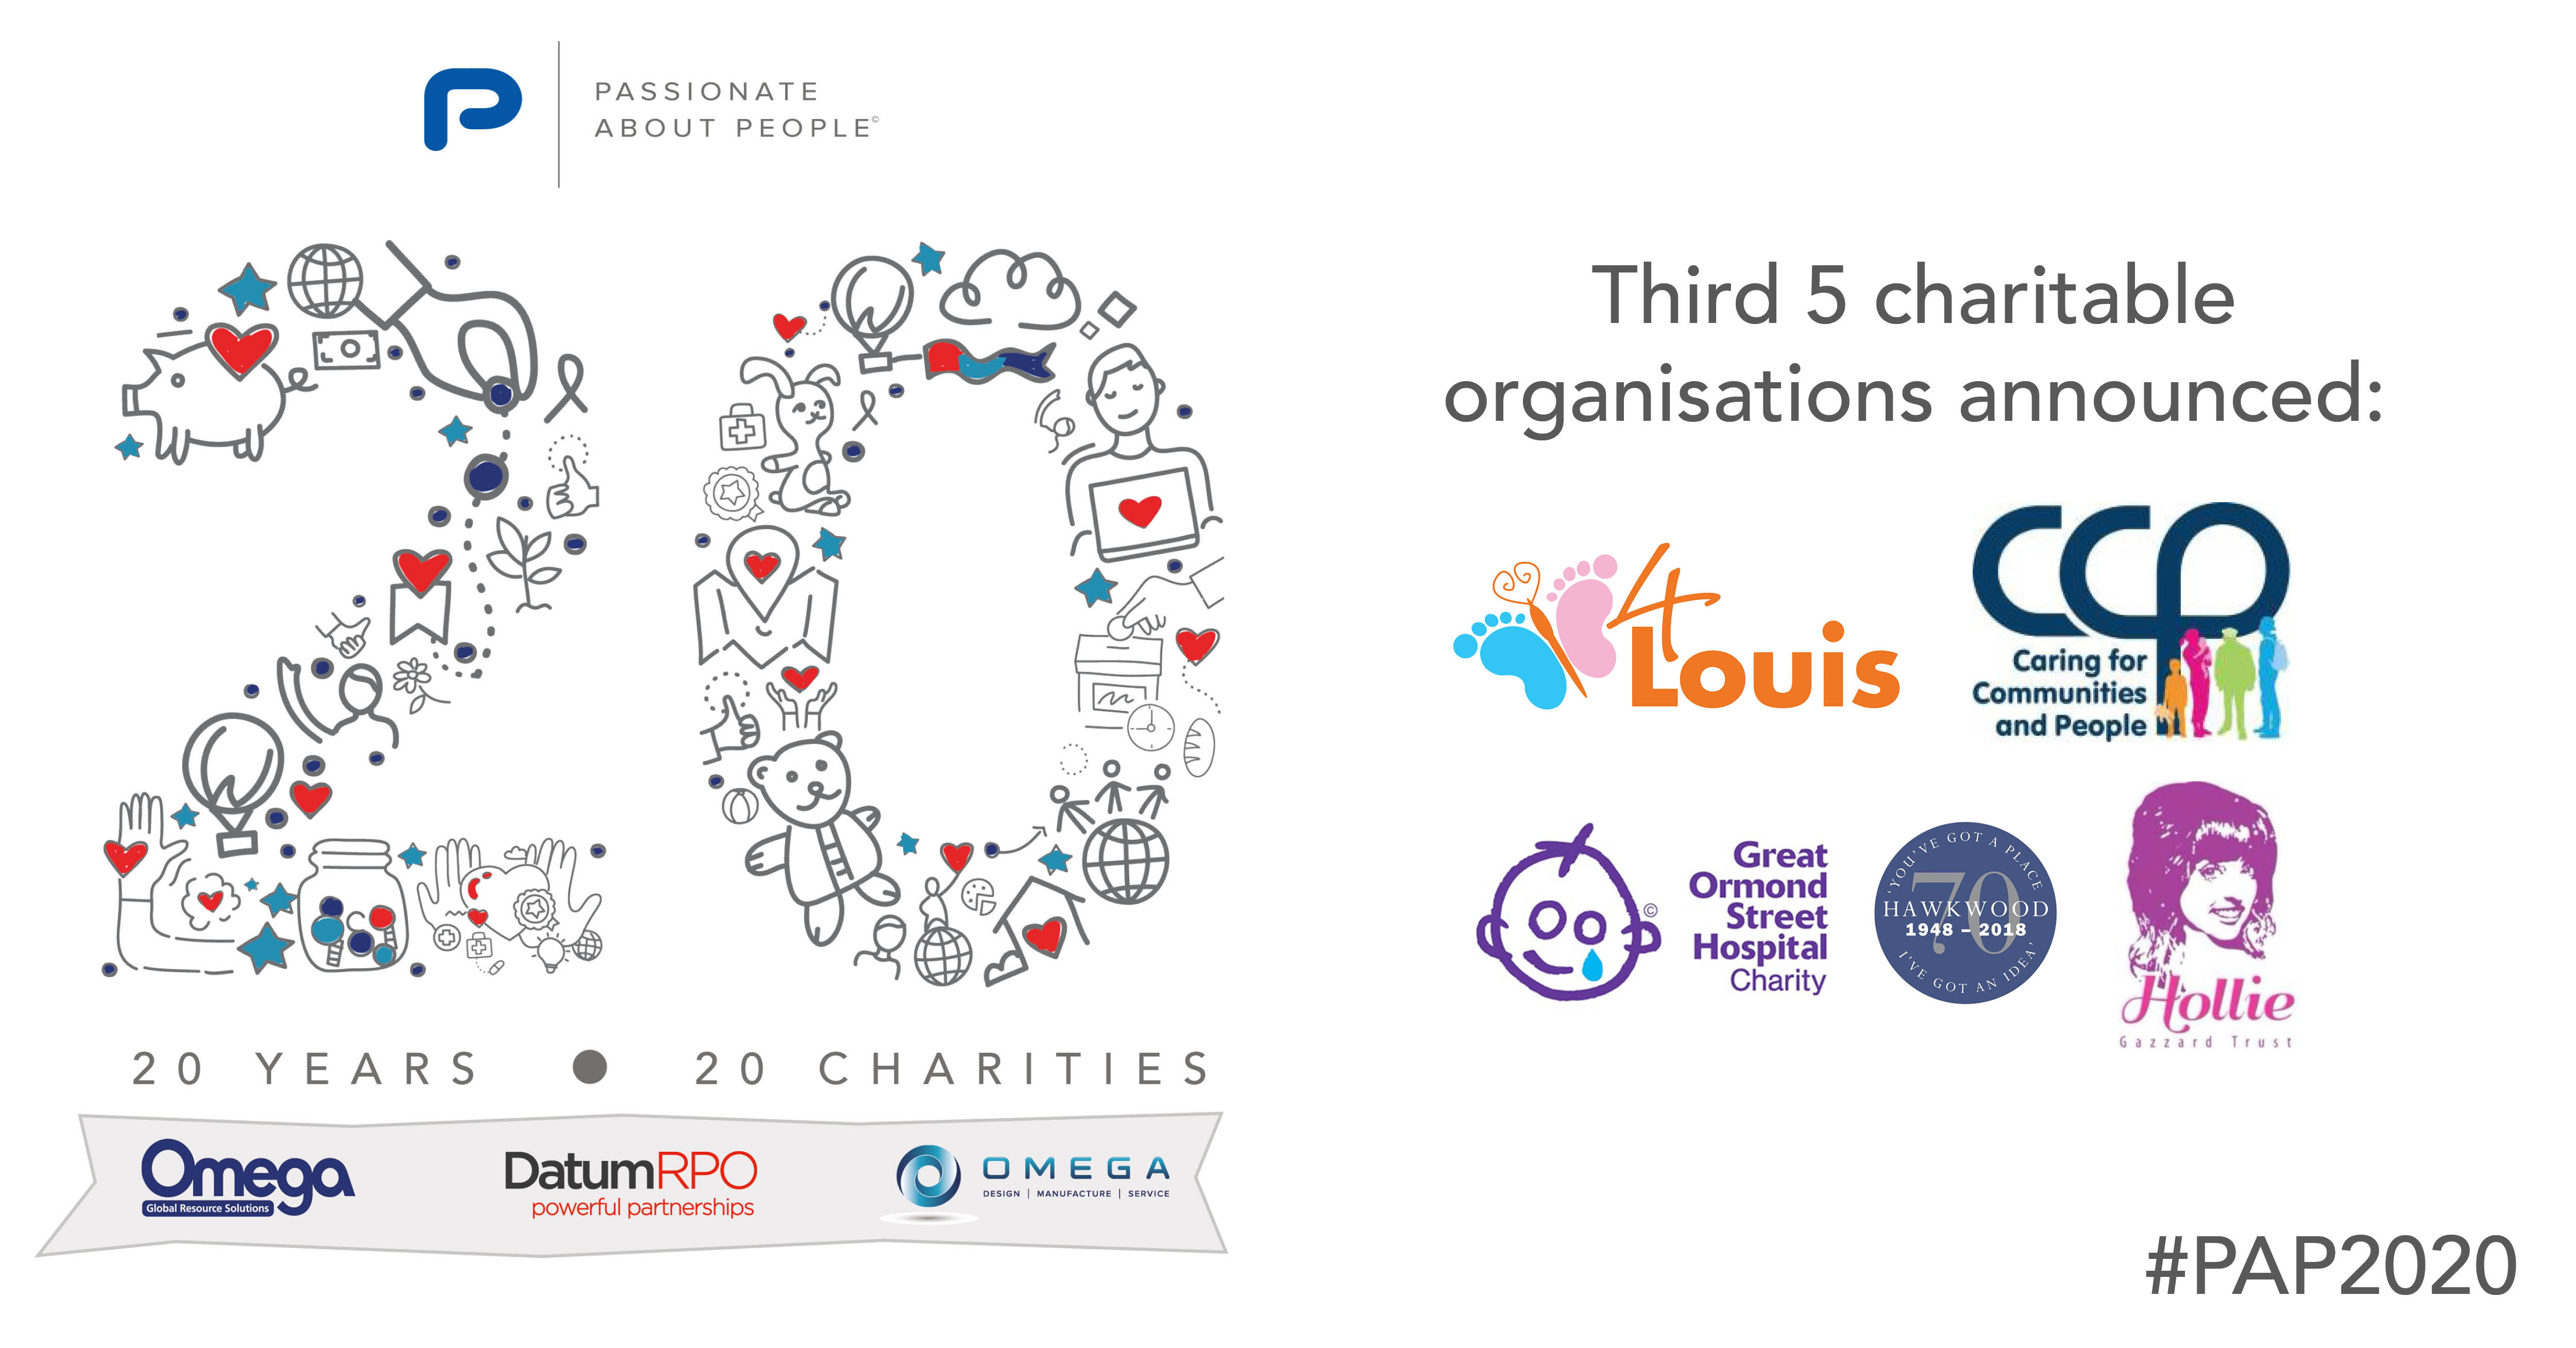 Third 5 Charities Announced: Passionate About People 20th Year Anniversary - #PAP2020